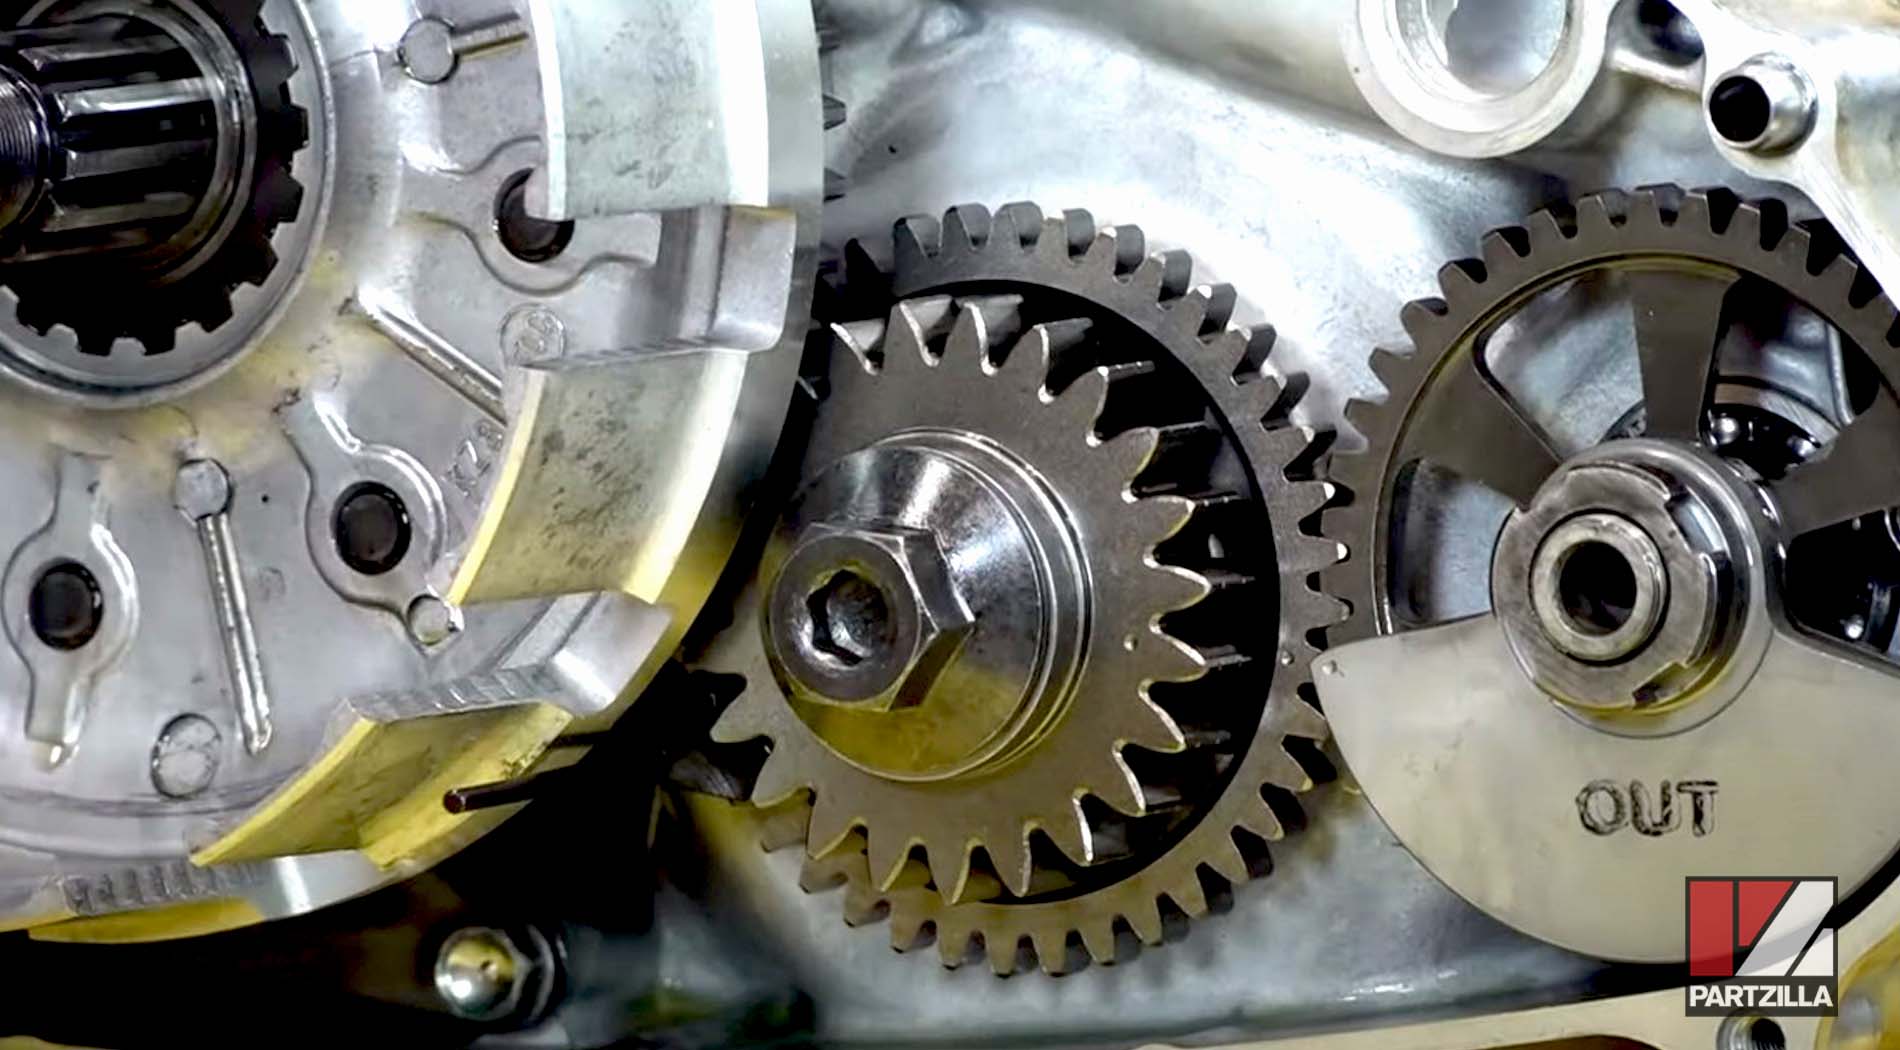 Honda CRF450 primary and secondary gears